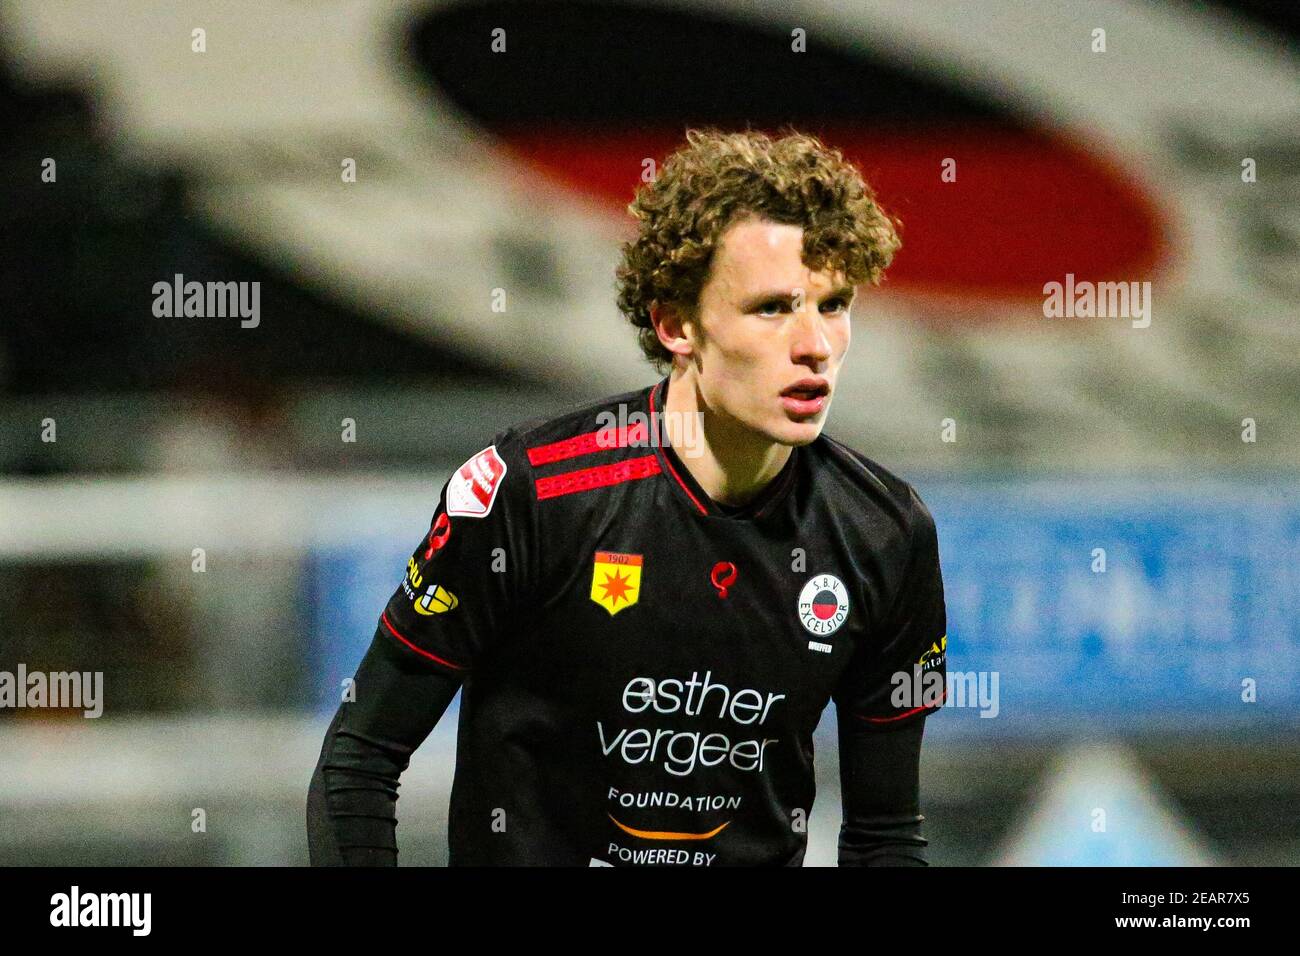 ROTTERDAM, NETHERLANDS, 9-2-2021, Van Donge en de Roo stadium, Dutch cup Quarter Final, Excelsior - Vitesse, Excelsior player Mats Wieffer (Photo by Pro Shots/Sipa USA) *** World Rights Except Austria and The Netherlands *** Stock Photo